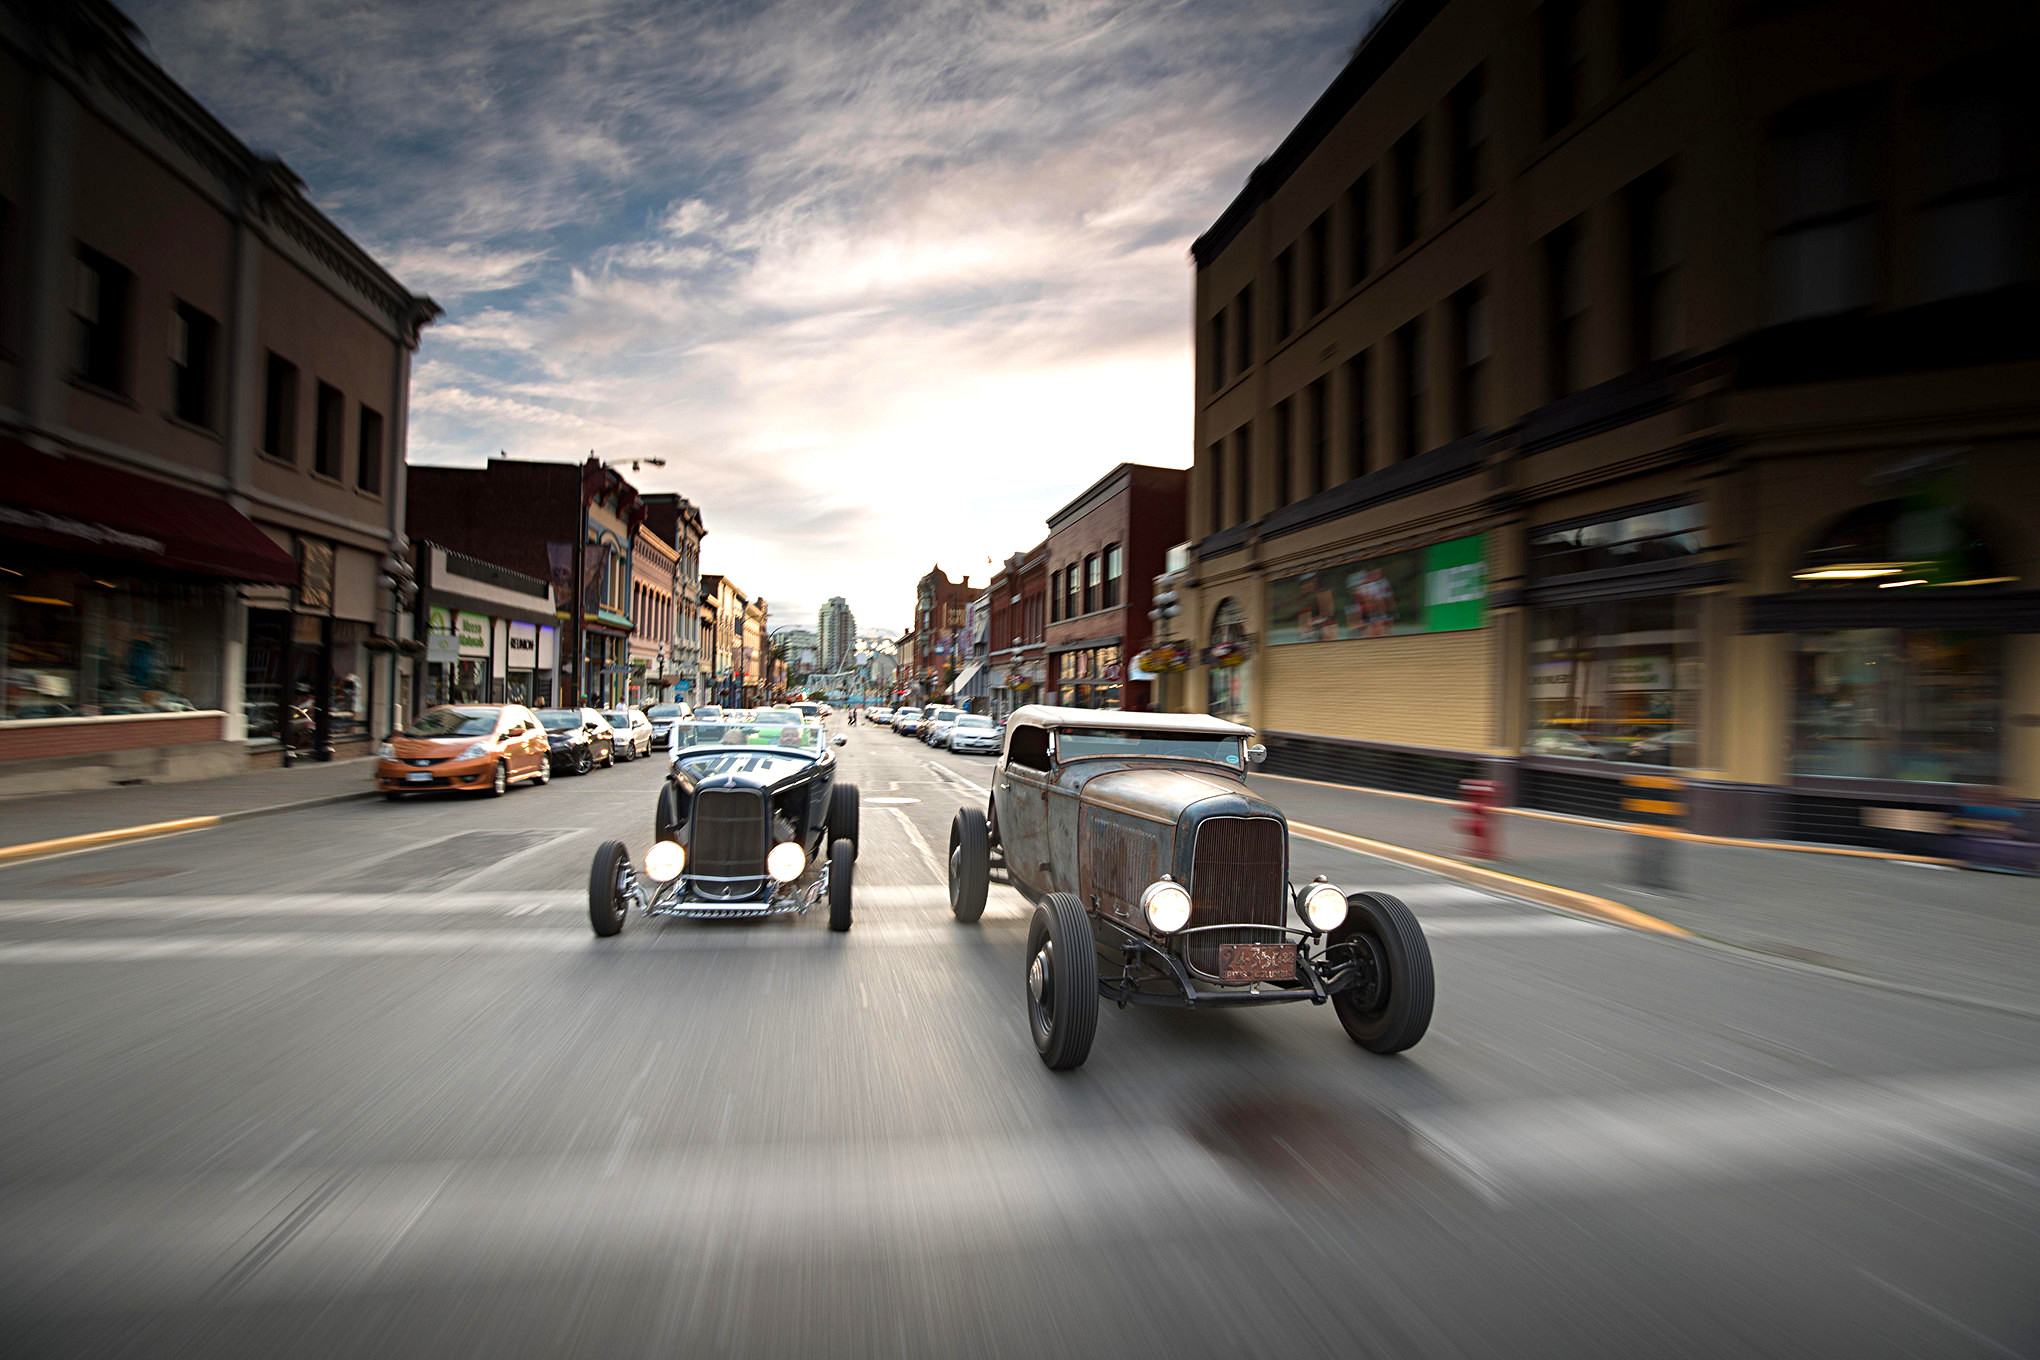 Ford Deuce Roadster  Free Stock Photos